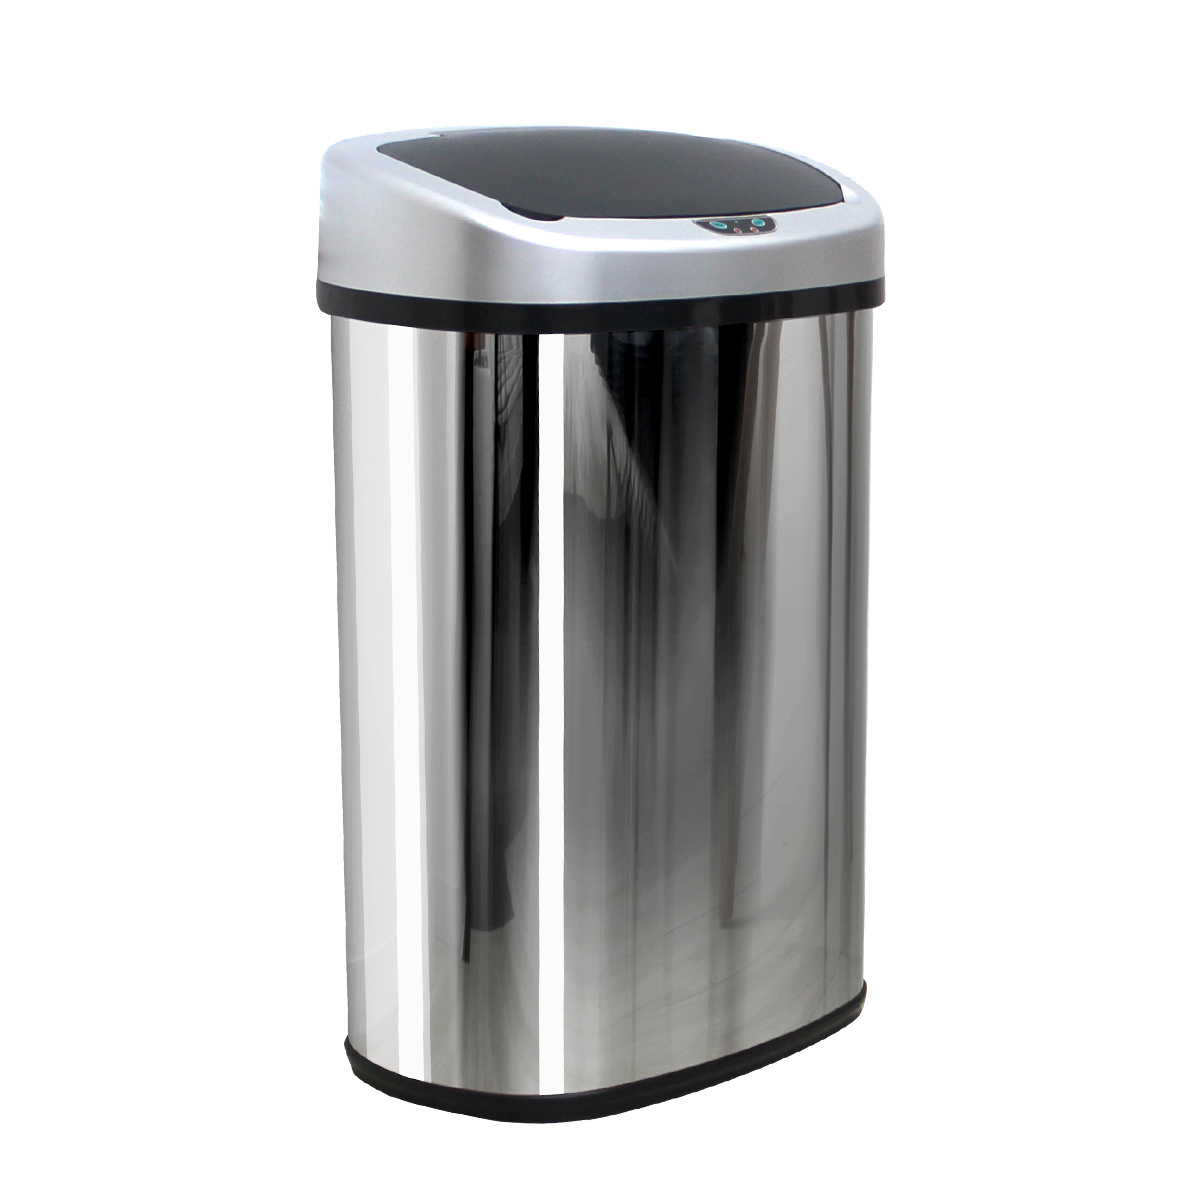  waste basket 48L automatic opening and closing dumpster full automation sensor stylish steel slim living kitchen cover attaching diapers trash can sanitation .